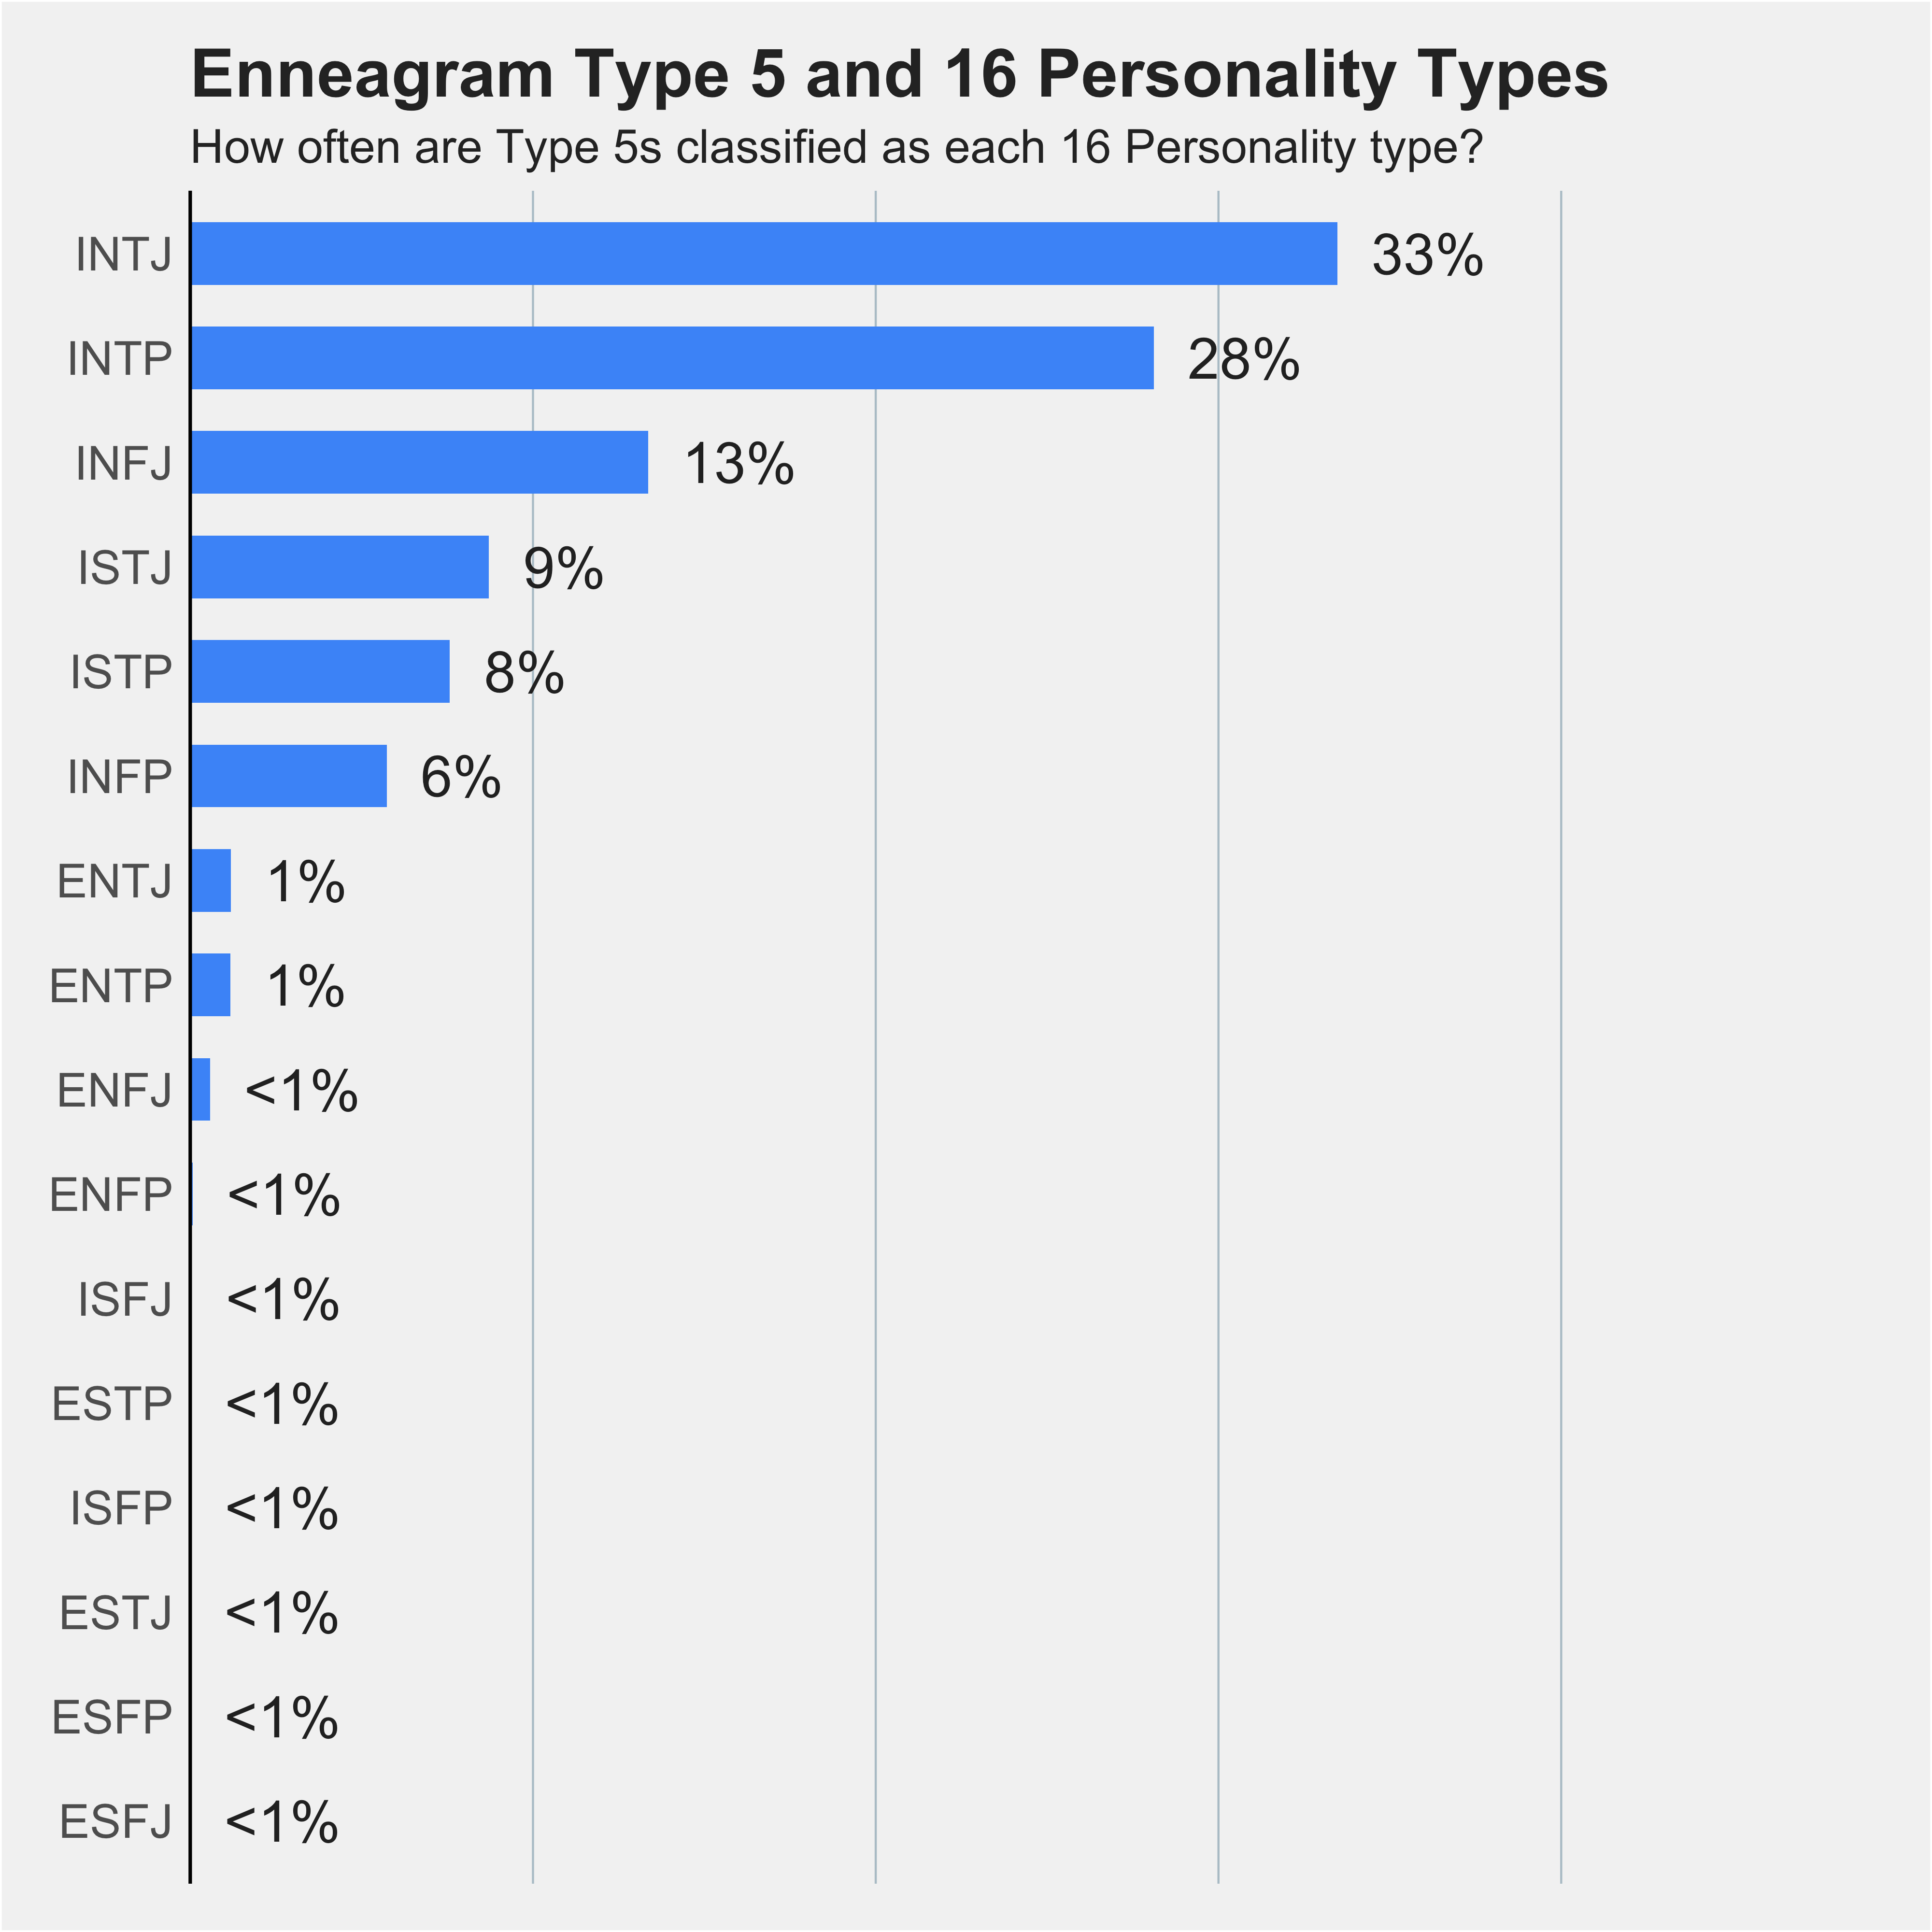 All the same as me (MBTI and Enneagram)!!